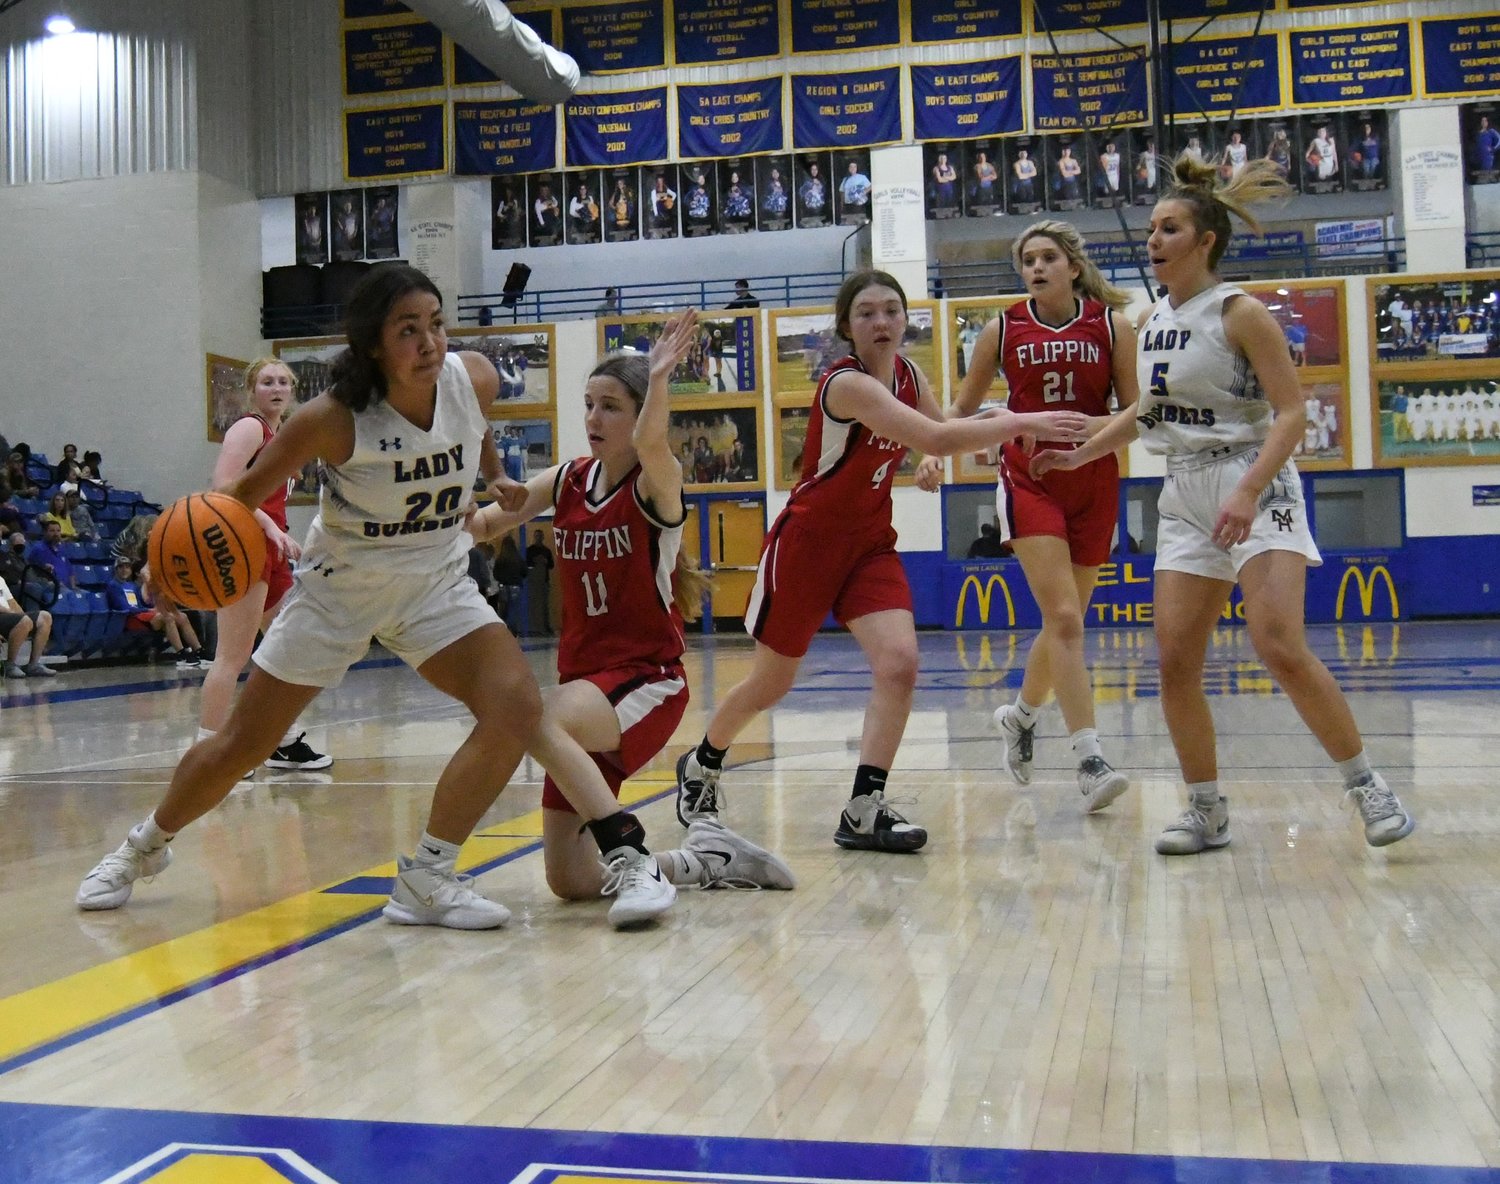 An image from the Mountain Home-Flippin senior girls game played Tuesday night at the Ultimate Auto Group Invitational at The Hangar.